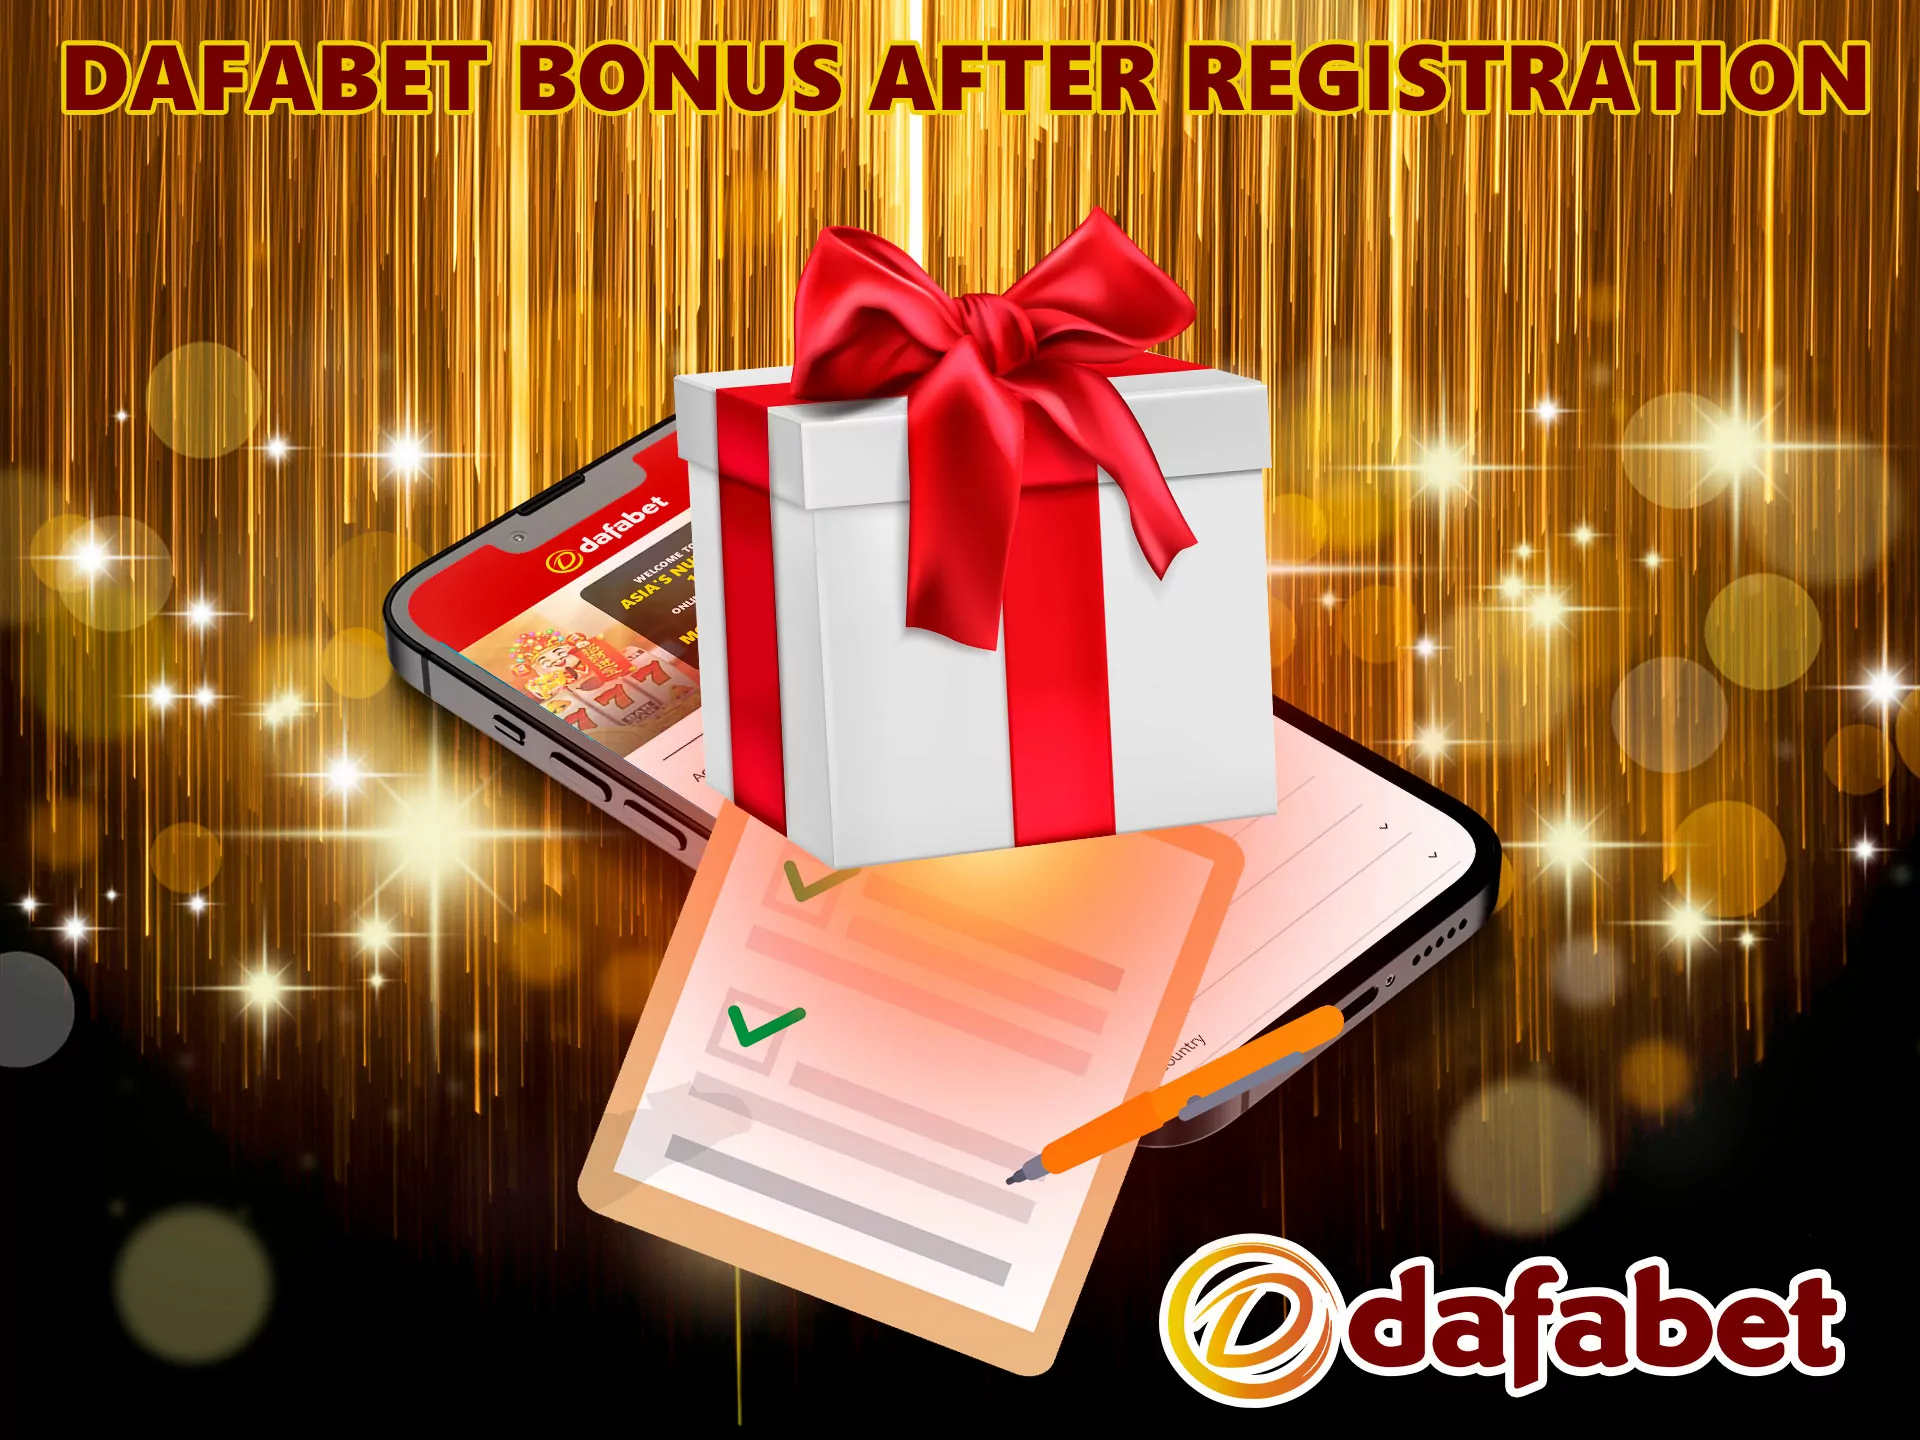 By registering, you will be pleasantly surprised, a bonus will be waiting at the first replenishment.